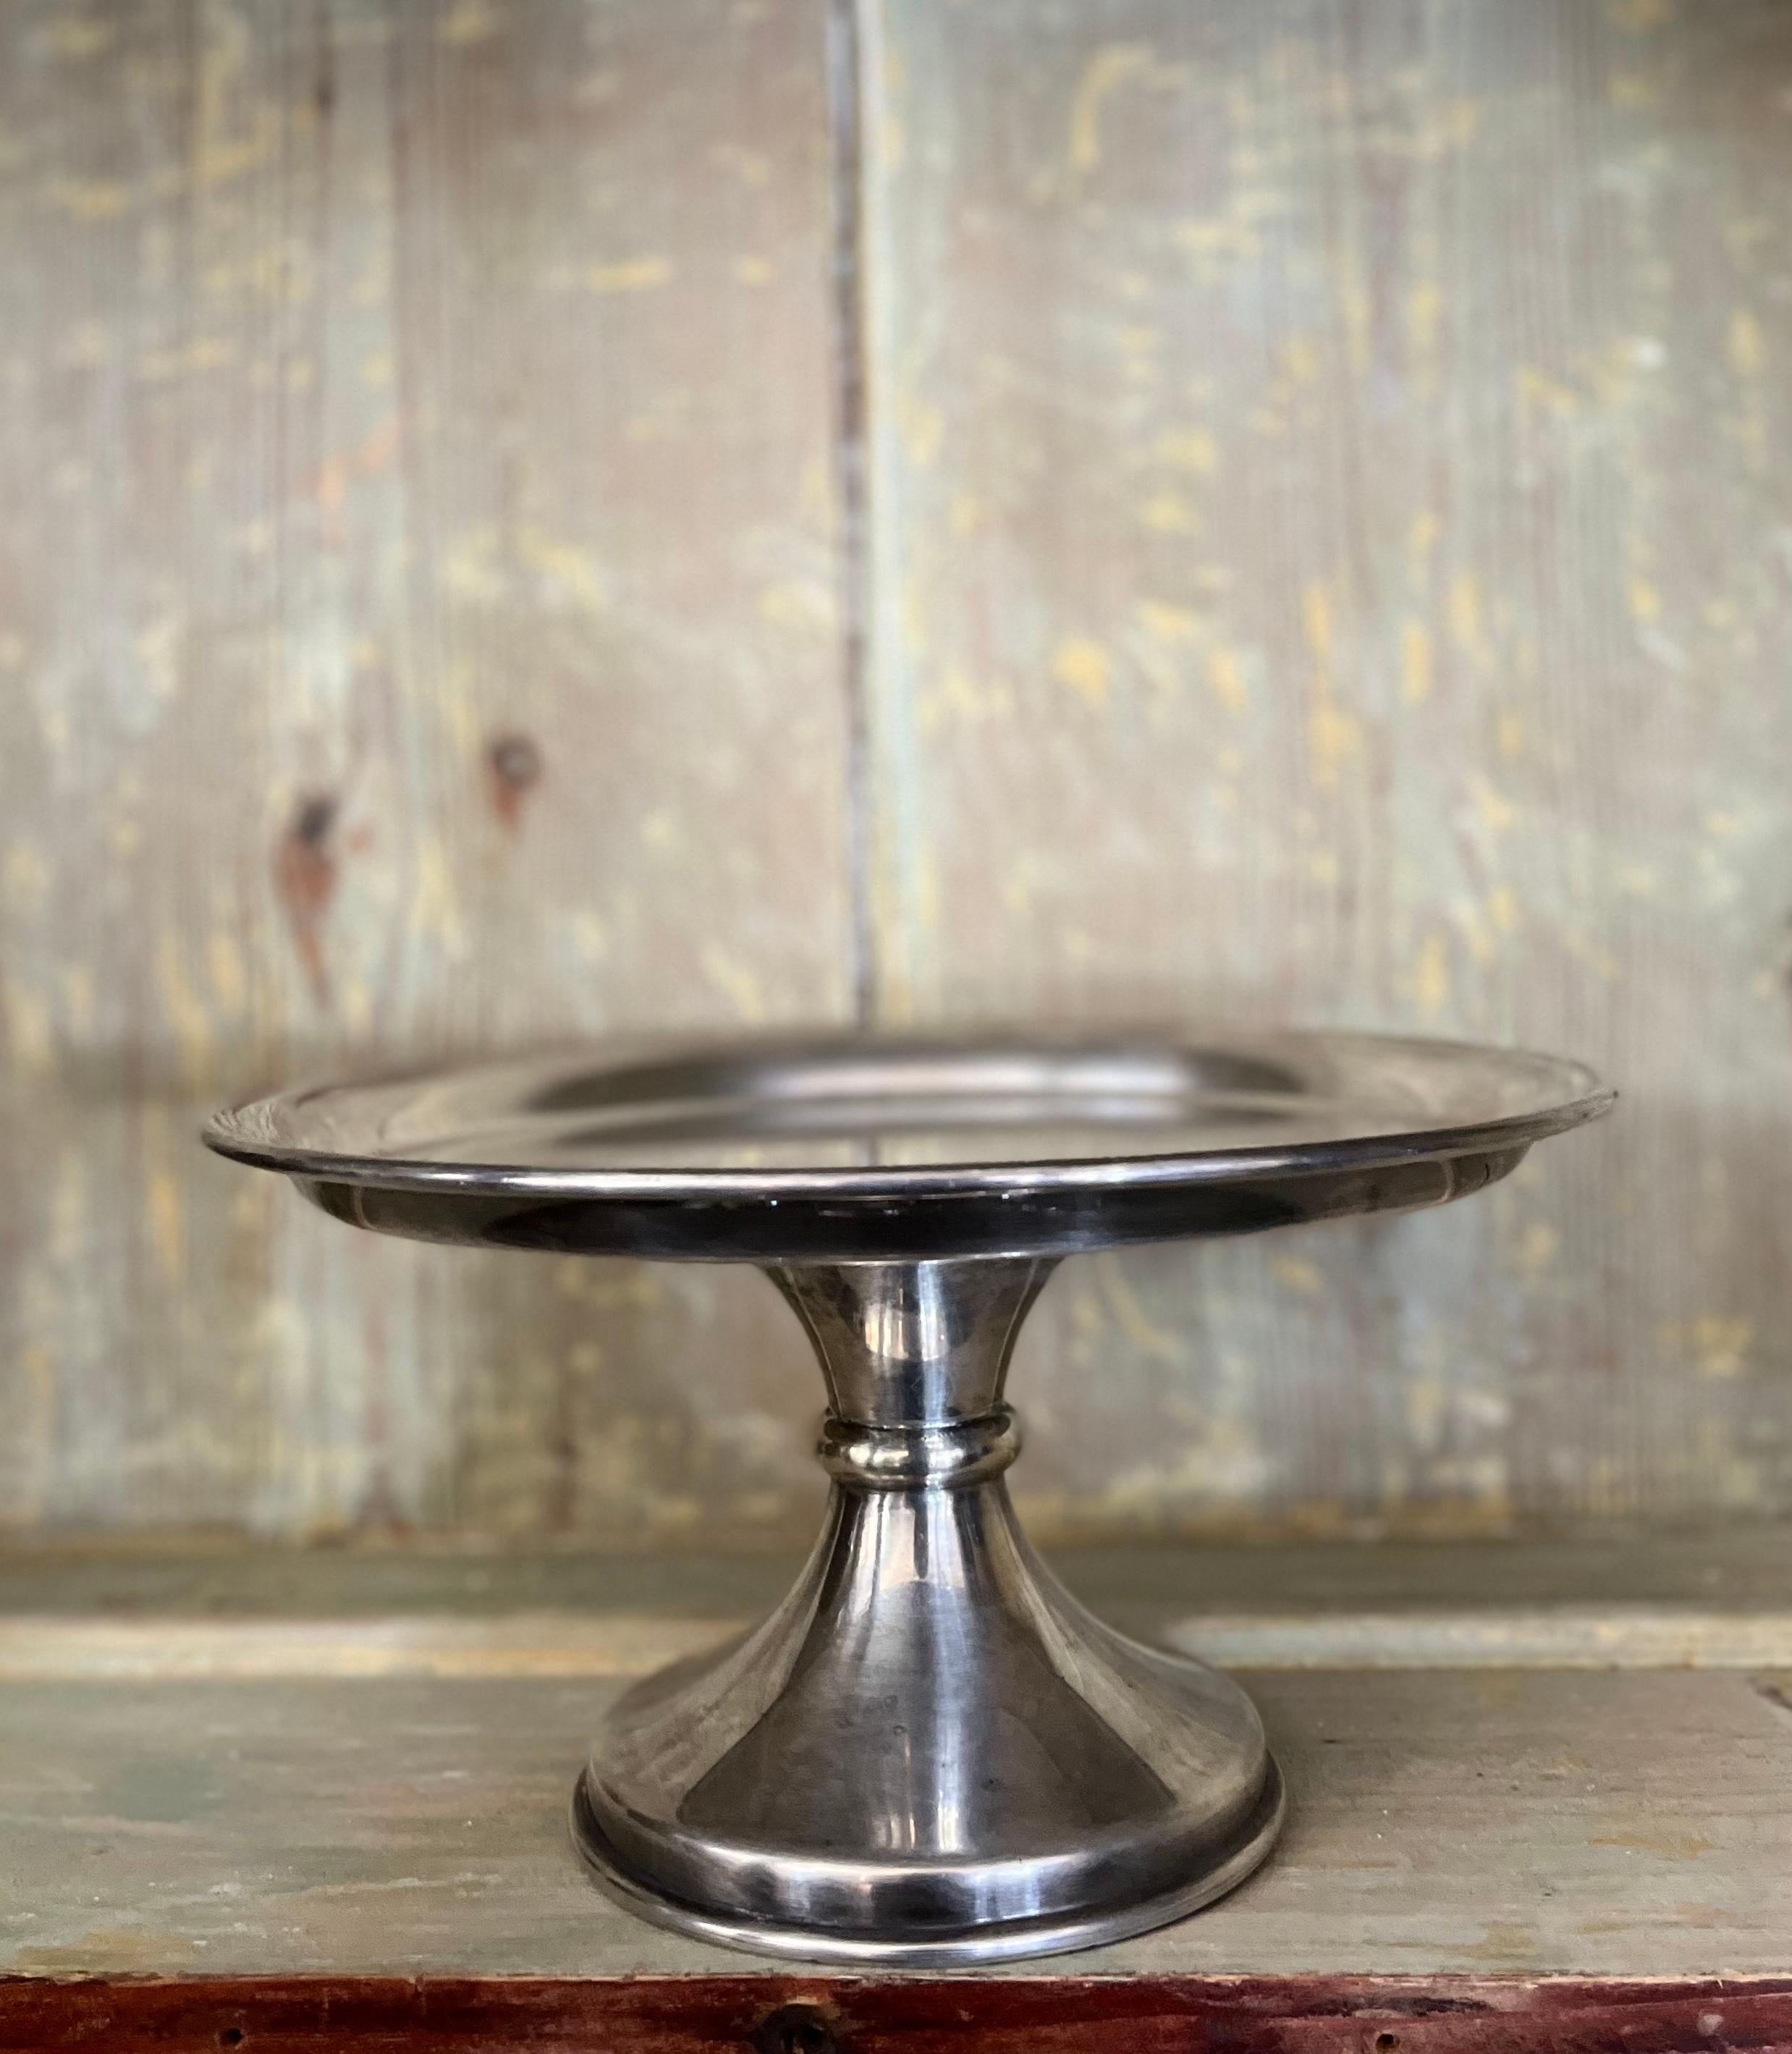 Victorian silverplate cake stand by Alex R. Clark and Co. With simple, traditional lines, the stand makes an interesting sculptural statement when used as a decorative accent in a shelf or table-scape, yet would work just as well as a display mount